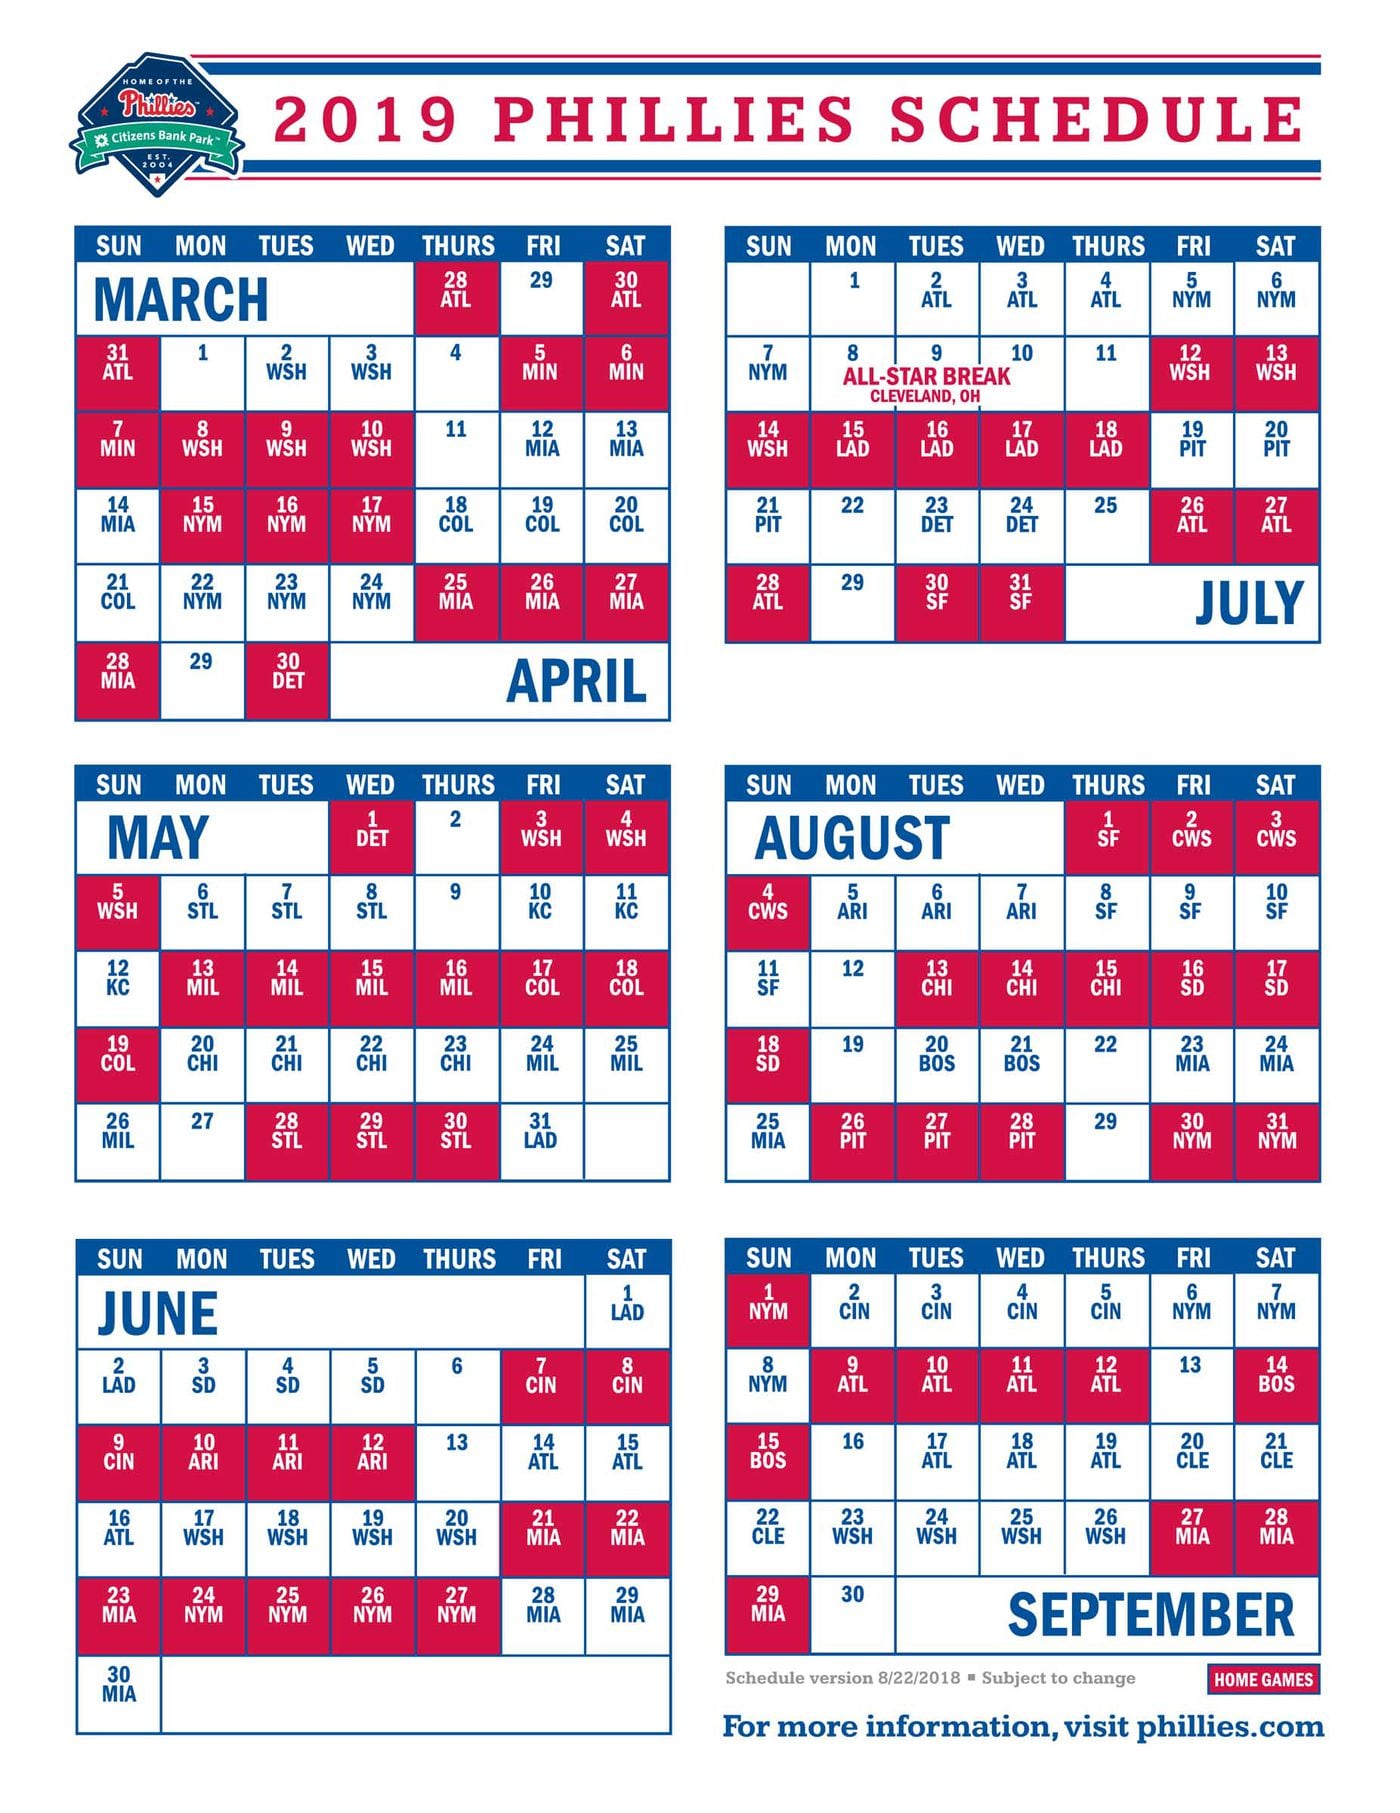 Phillies to open 2019 schedule against the Braves